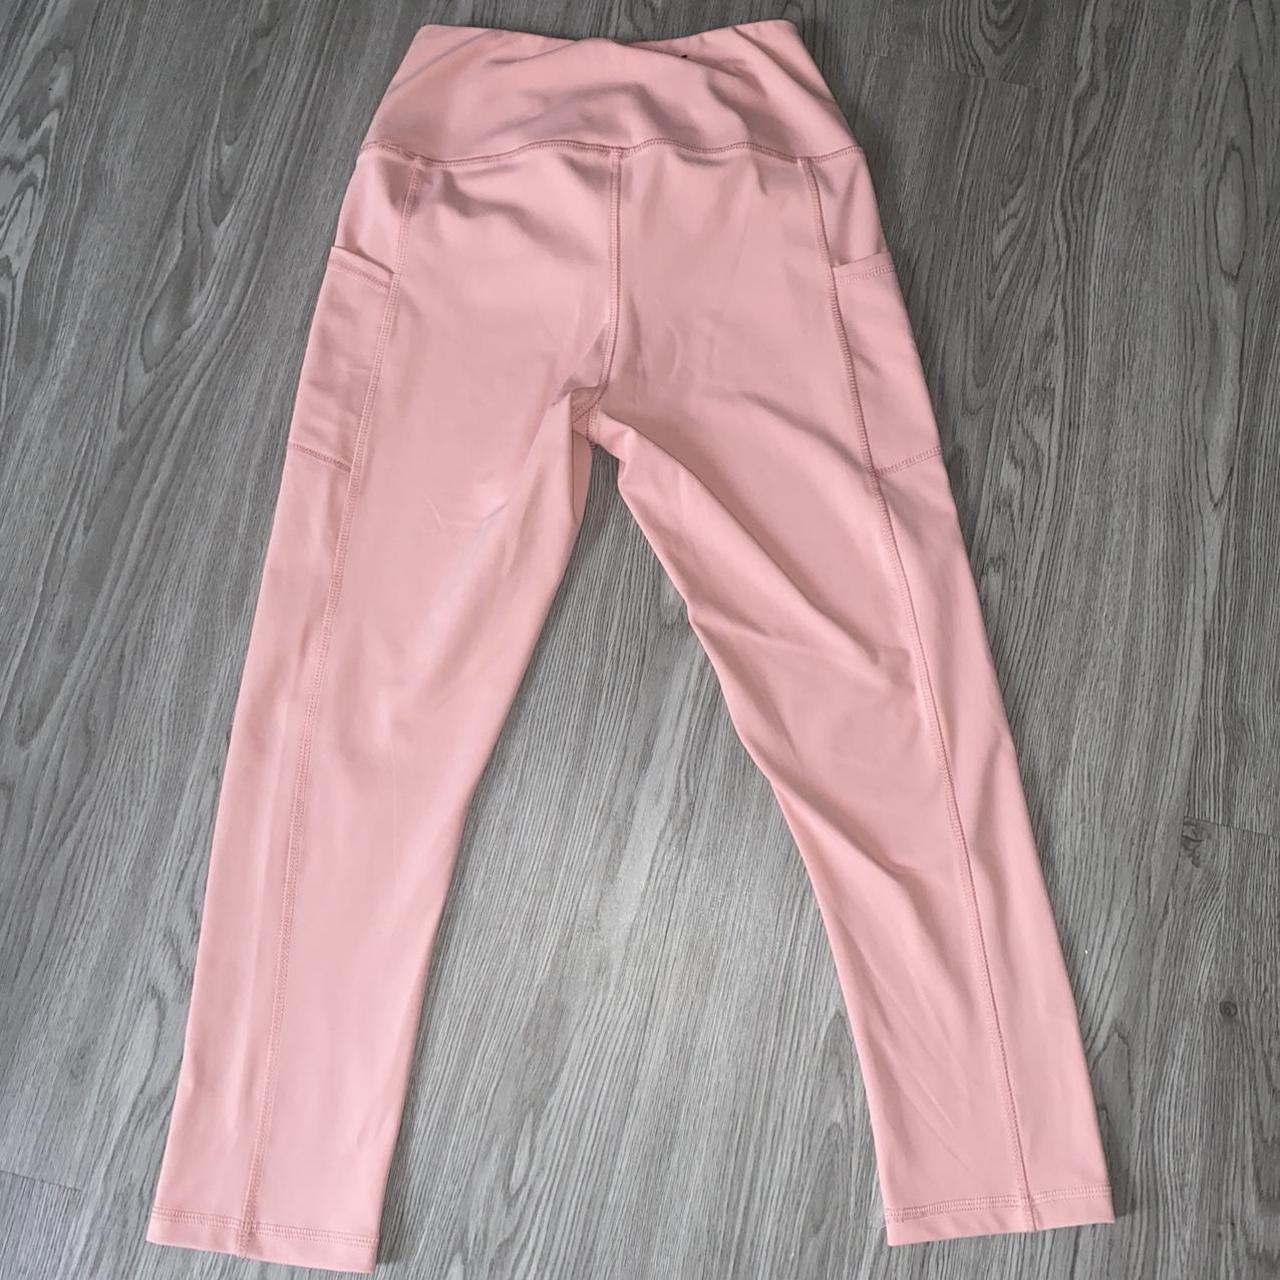 Beverly Hills Polo Club Pink Leggings (3)